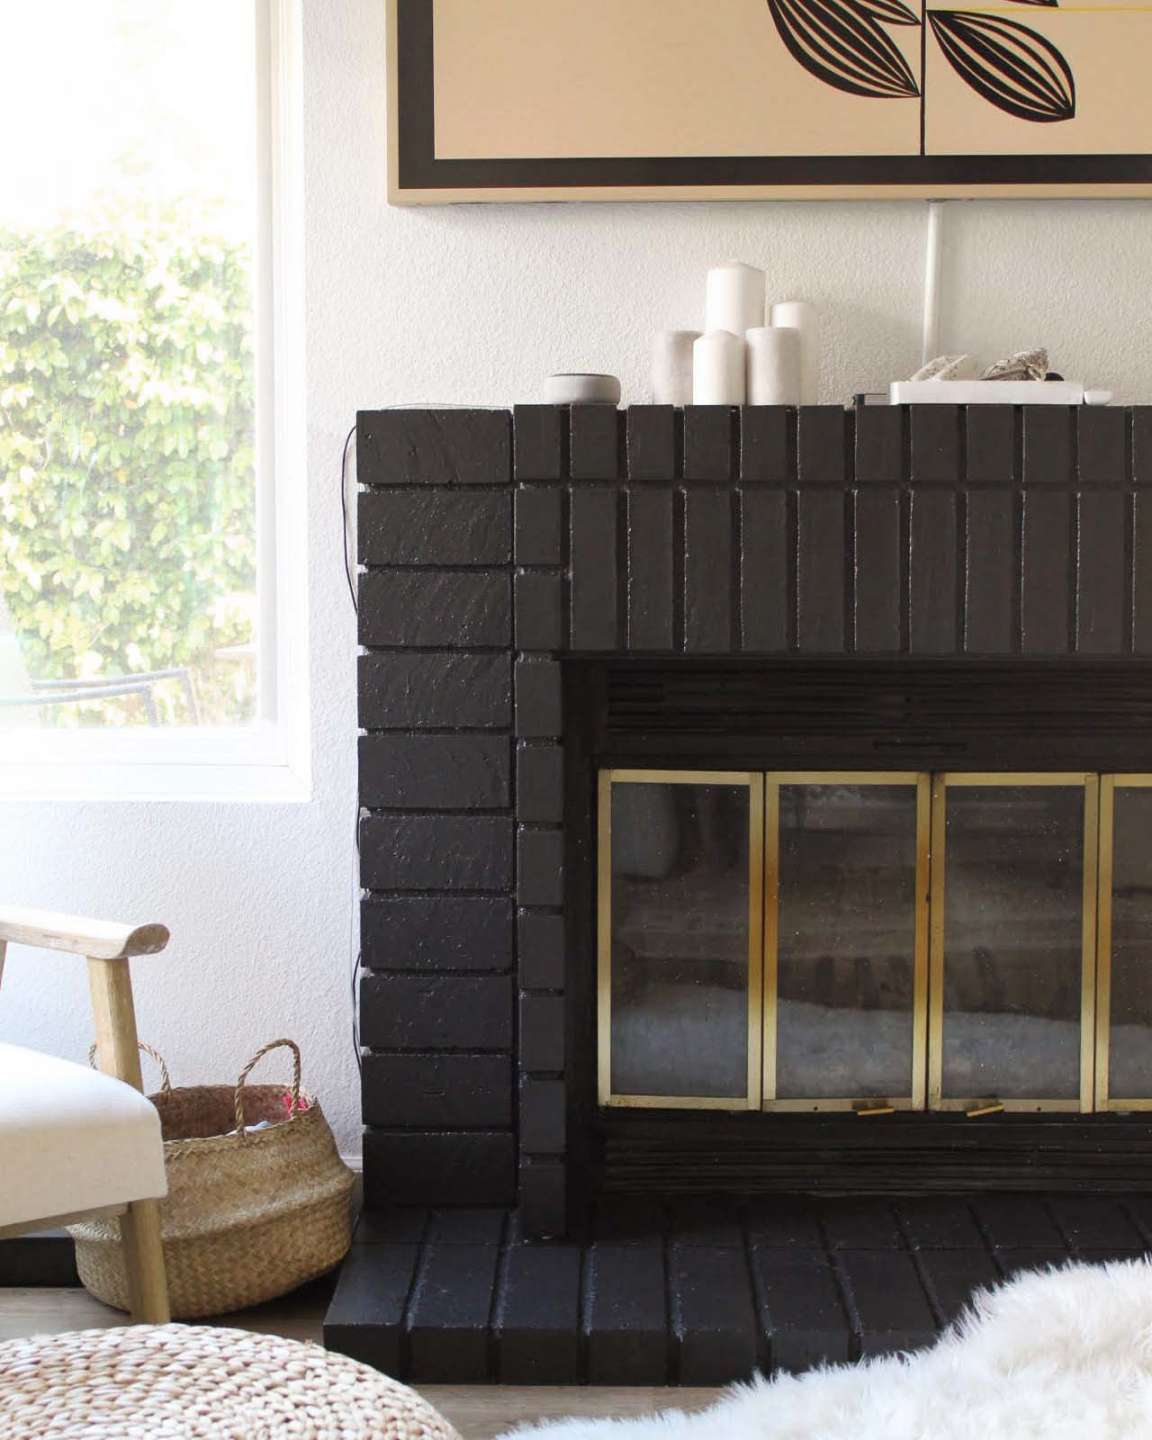 How A Painted Brick Fireplace Will Change Your Living Room – Clare